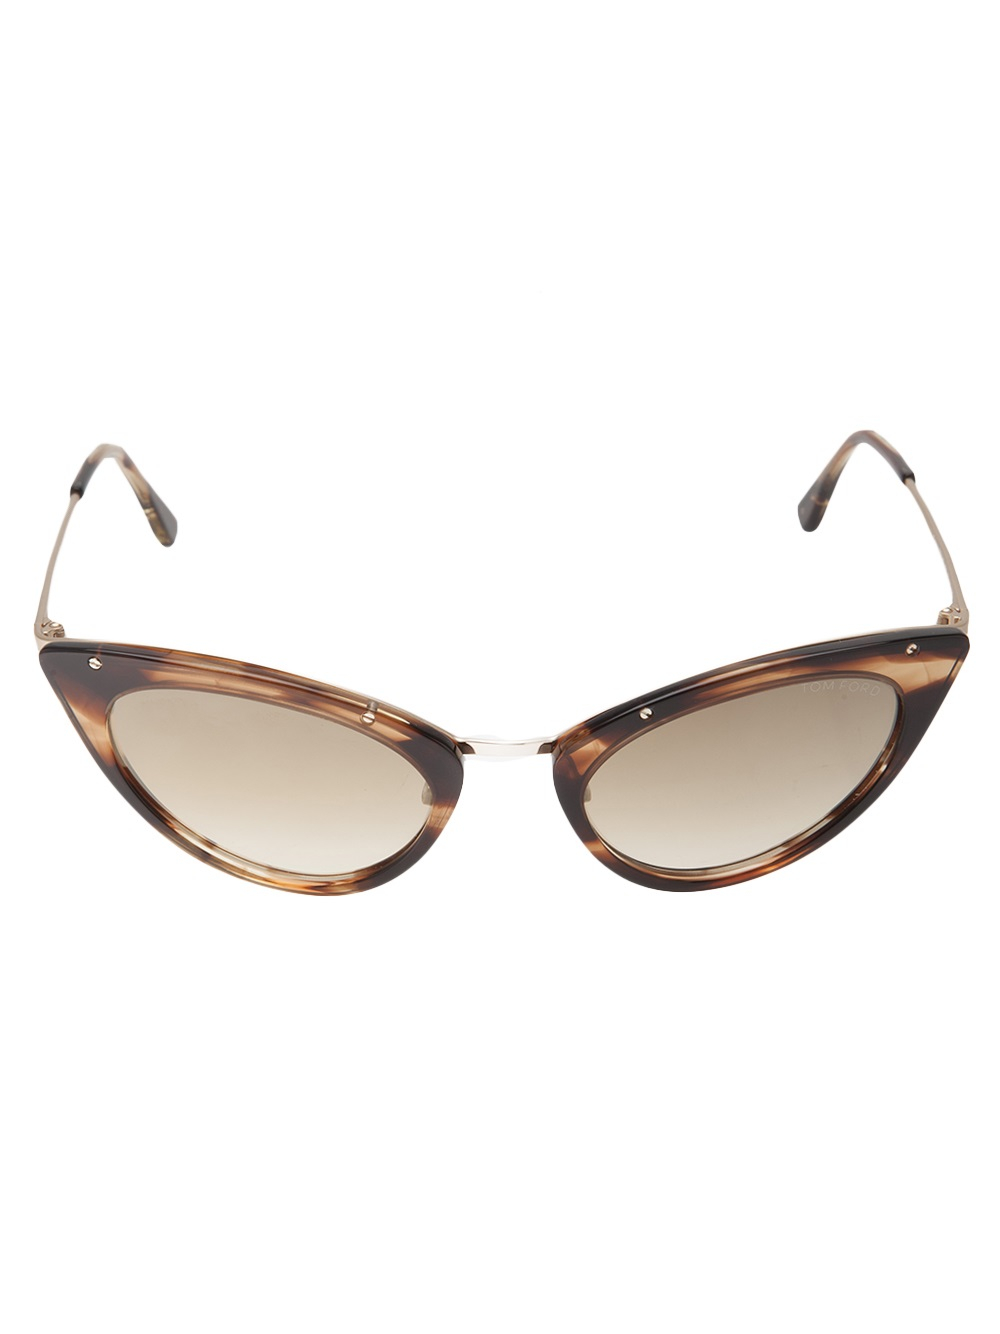 Lyst - Tom Ford Donna Sunglasses in Brown